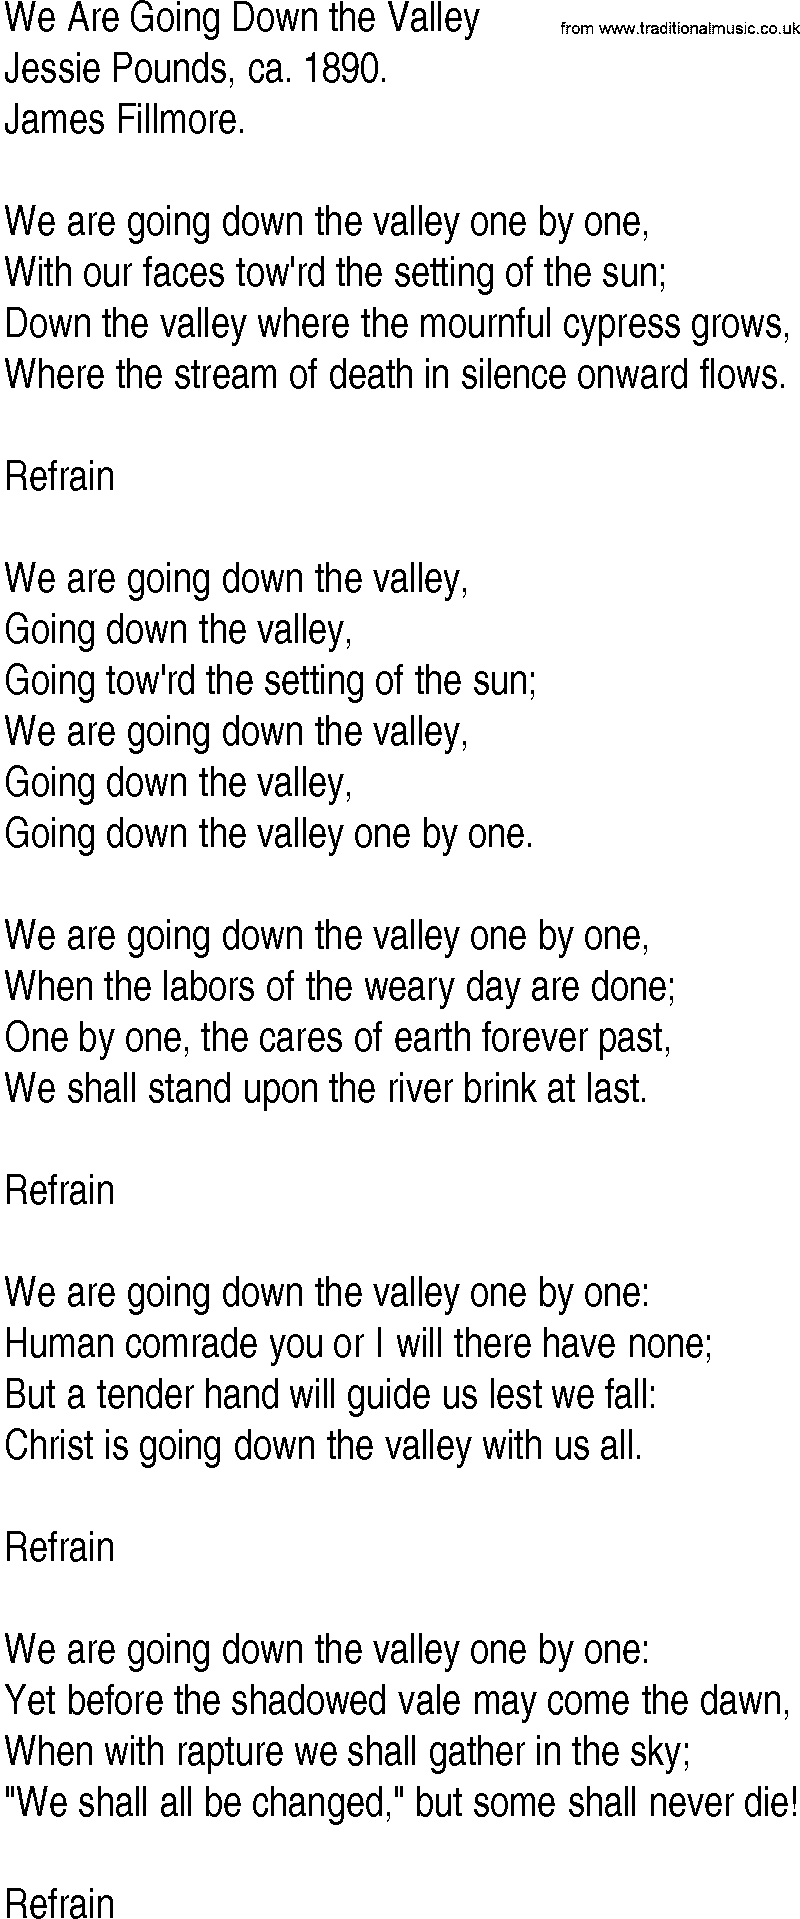 Hymn and Gospel Song: We Are Going Down the Valley by Jessie Pounds ca lyrics